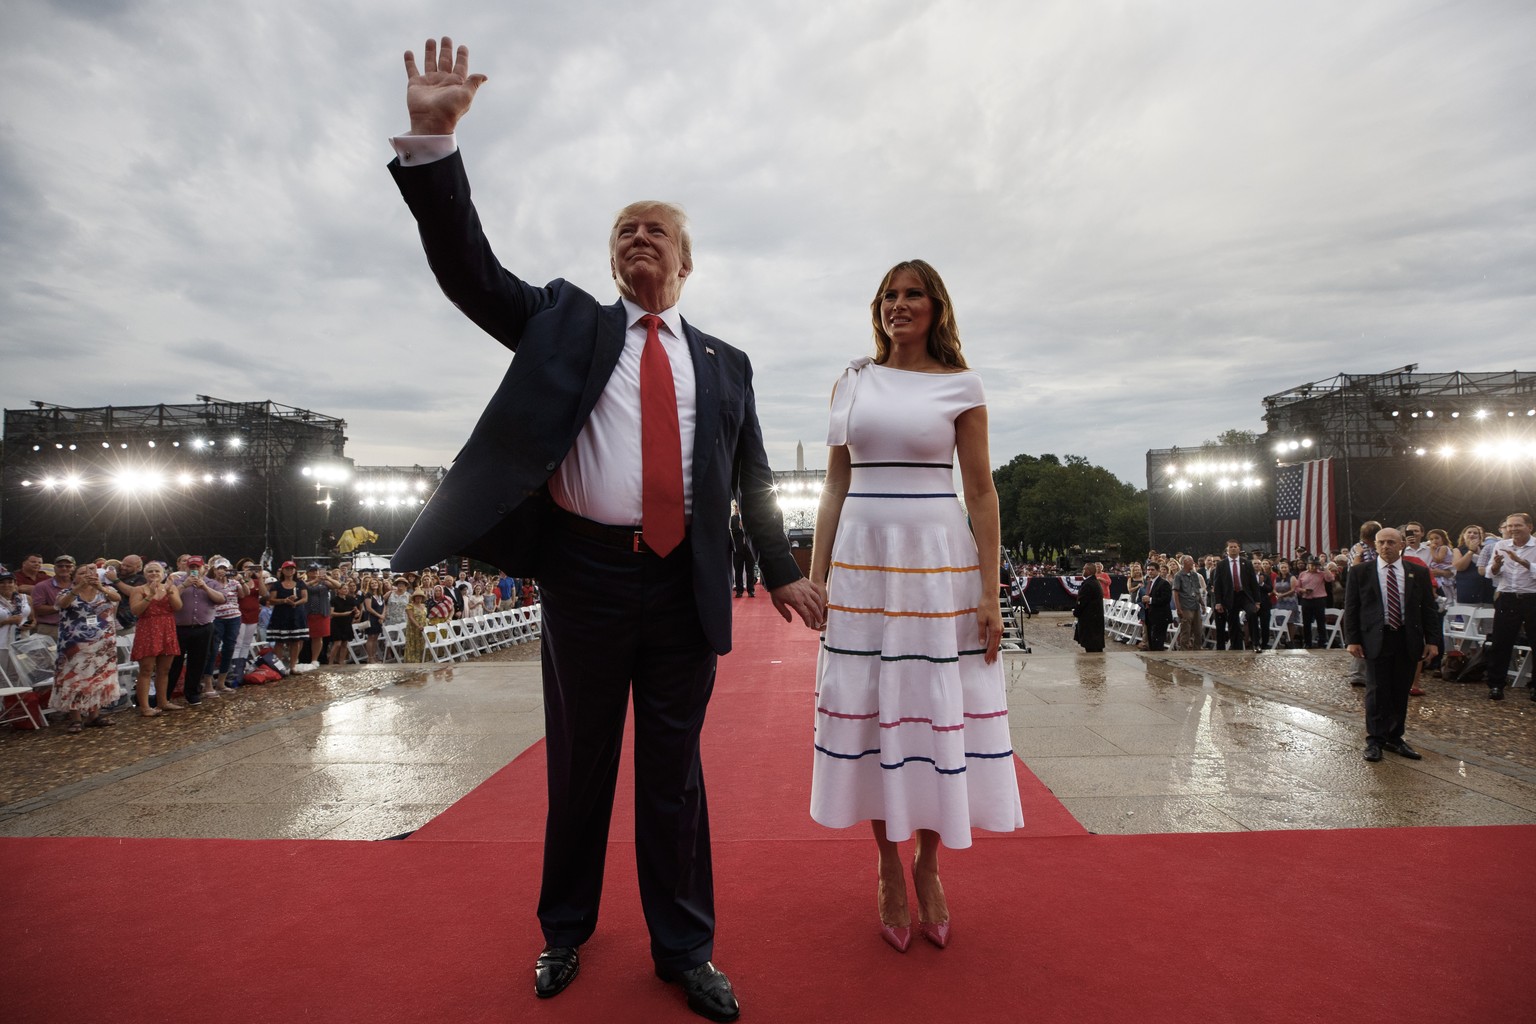 President Donald Trump and first lady Melania Trump leave an Independence Day celebration in front of the Lincoln Memorial, Thursday, July 4, 2019, in Washington. (AP Photo/Carolyn Kaster)
Donald Trum ...